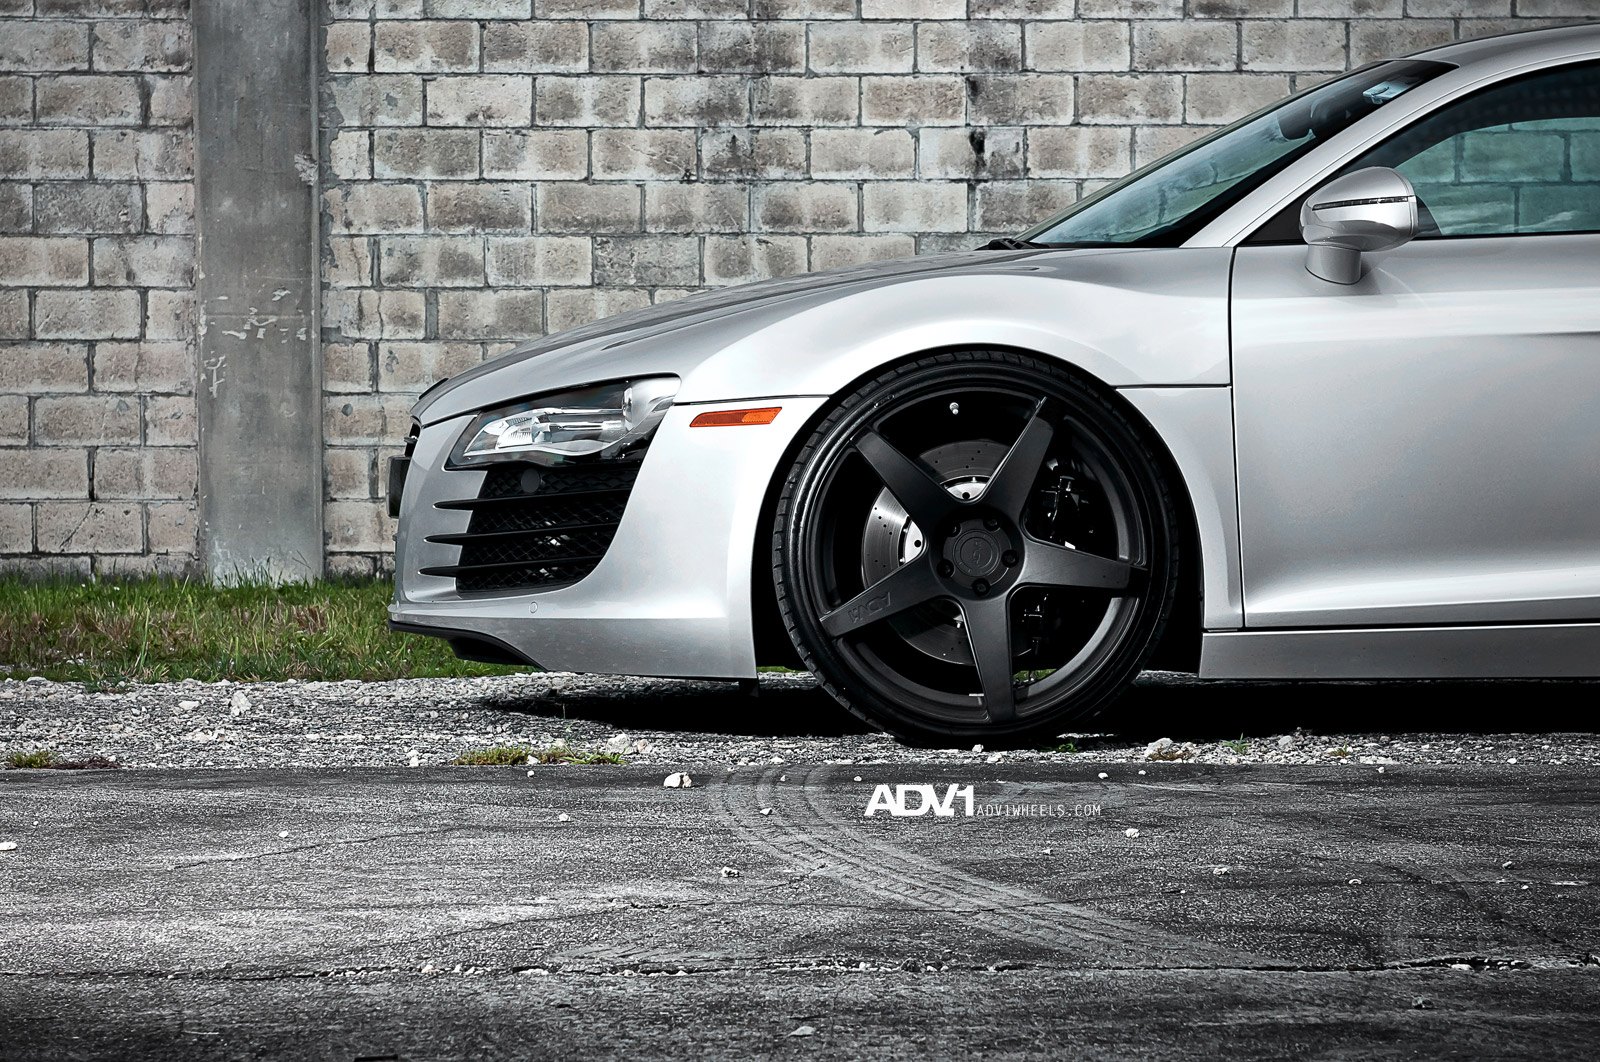 Silver Audi R8 with Custom Front Bumper - Photo by ADV.1